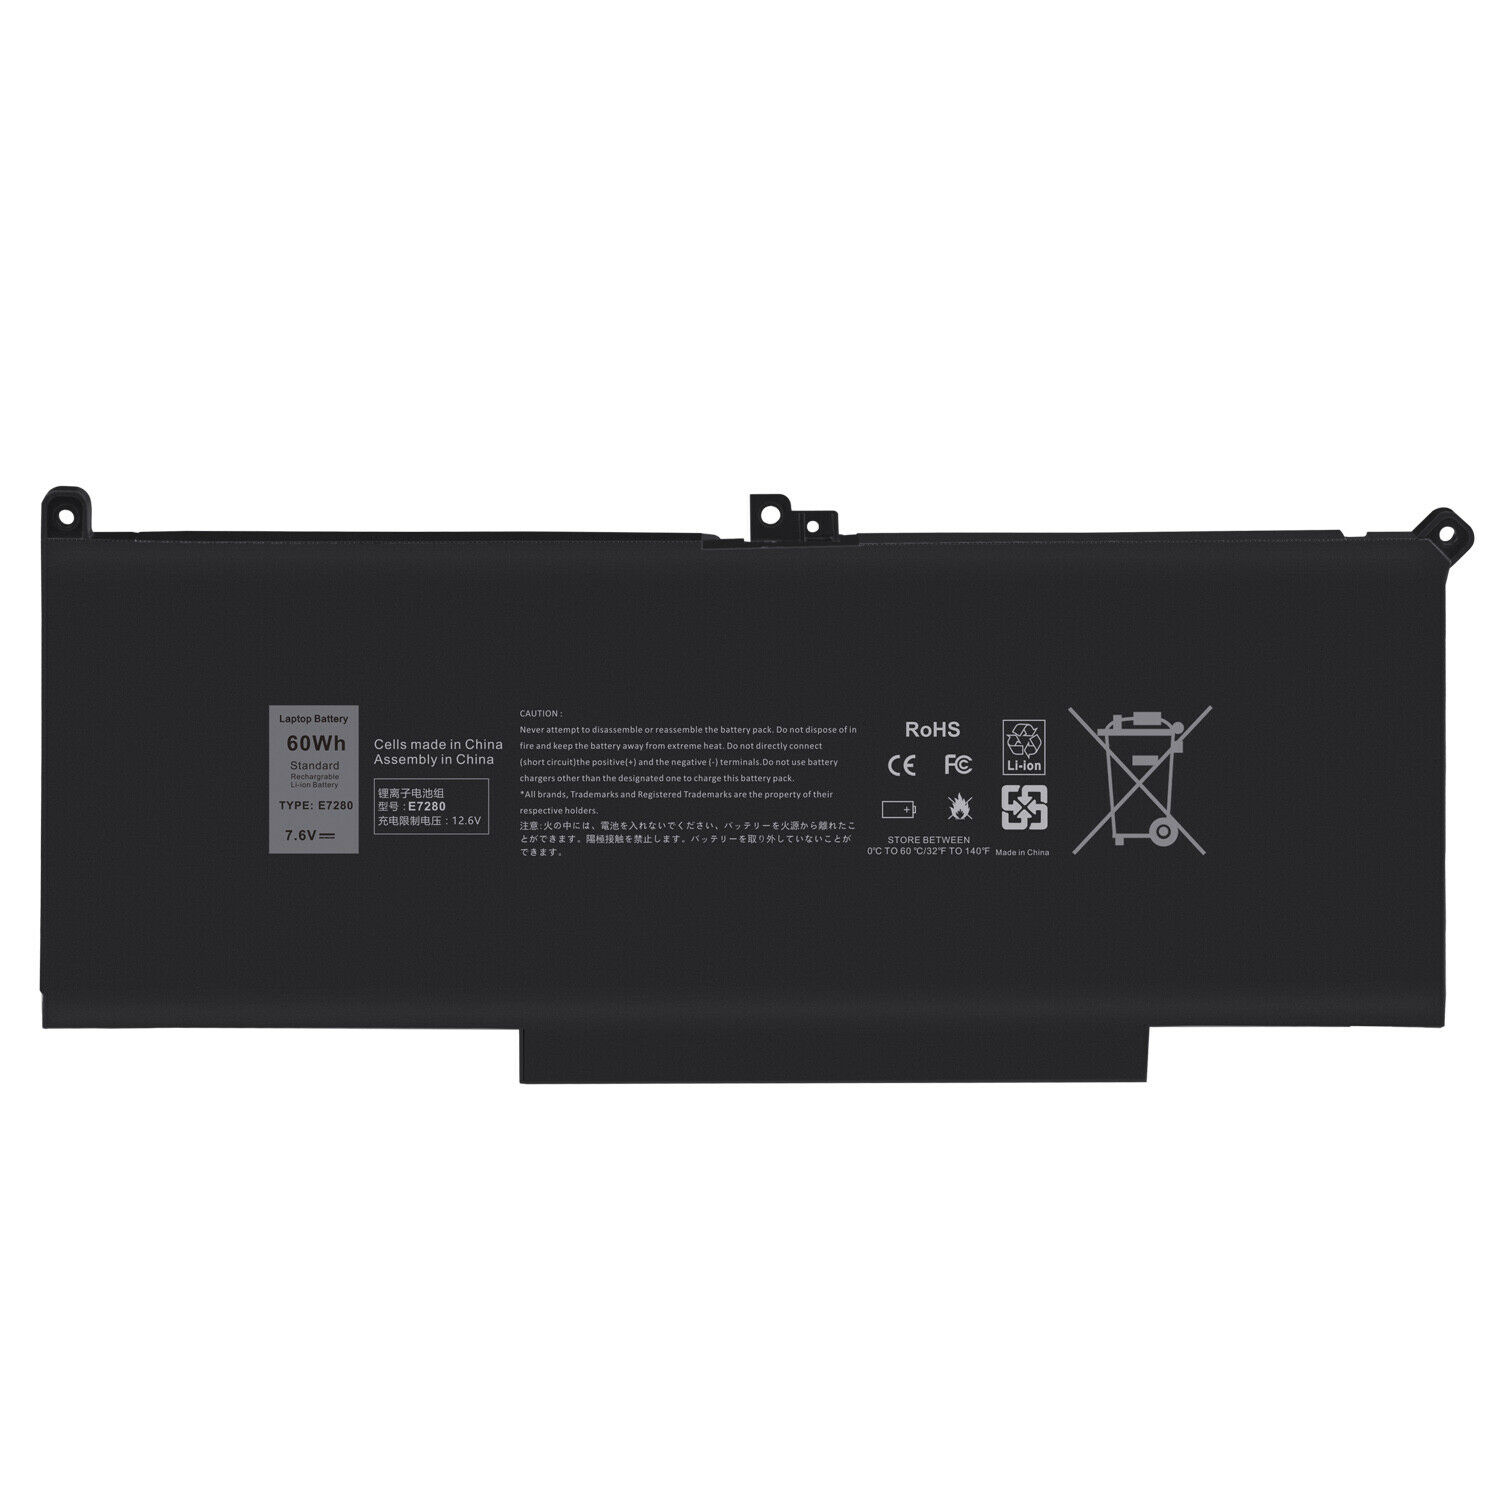 Akku für F3YGT Dell latitude 7490 (i5-8350U FHD) P73G002 P29S002 KG7VF 2X39G(compatible)